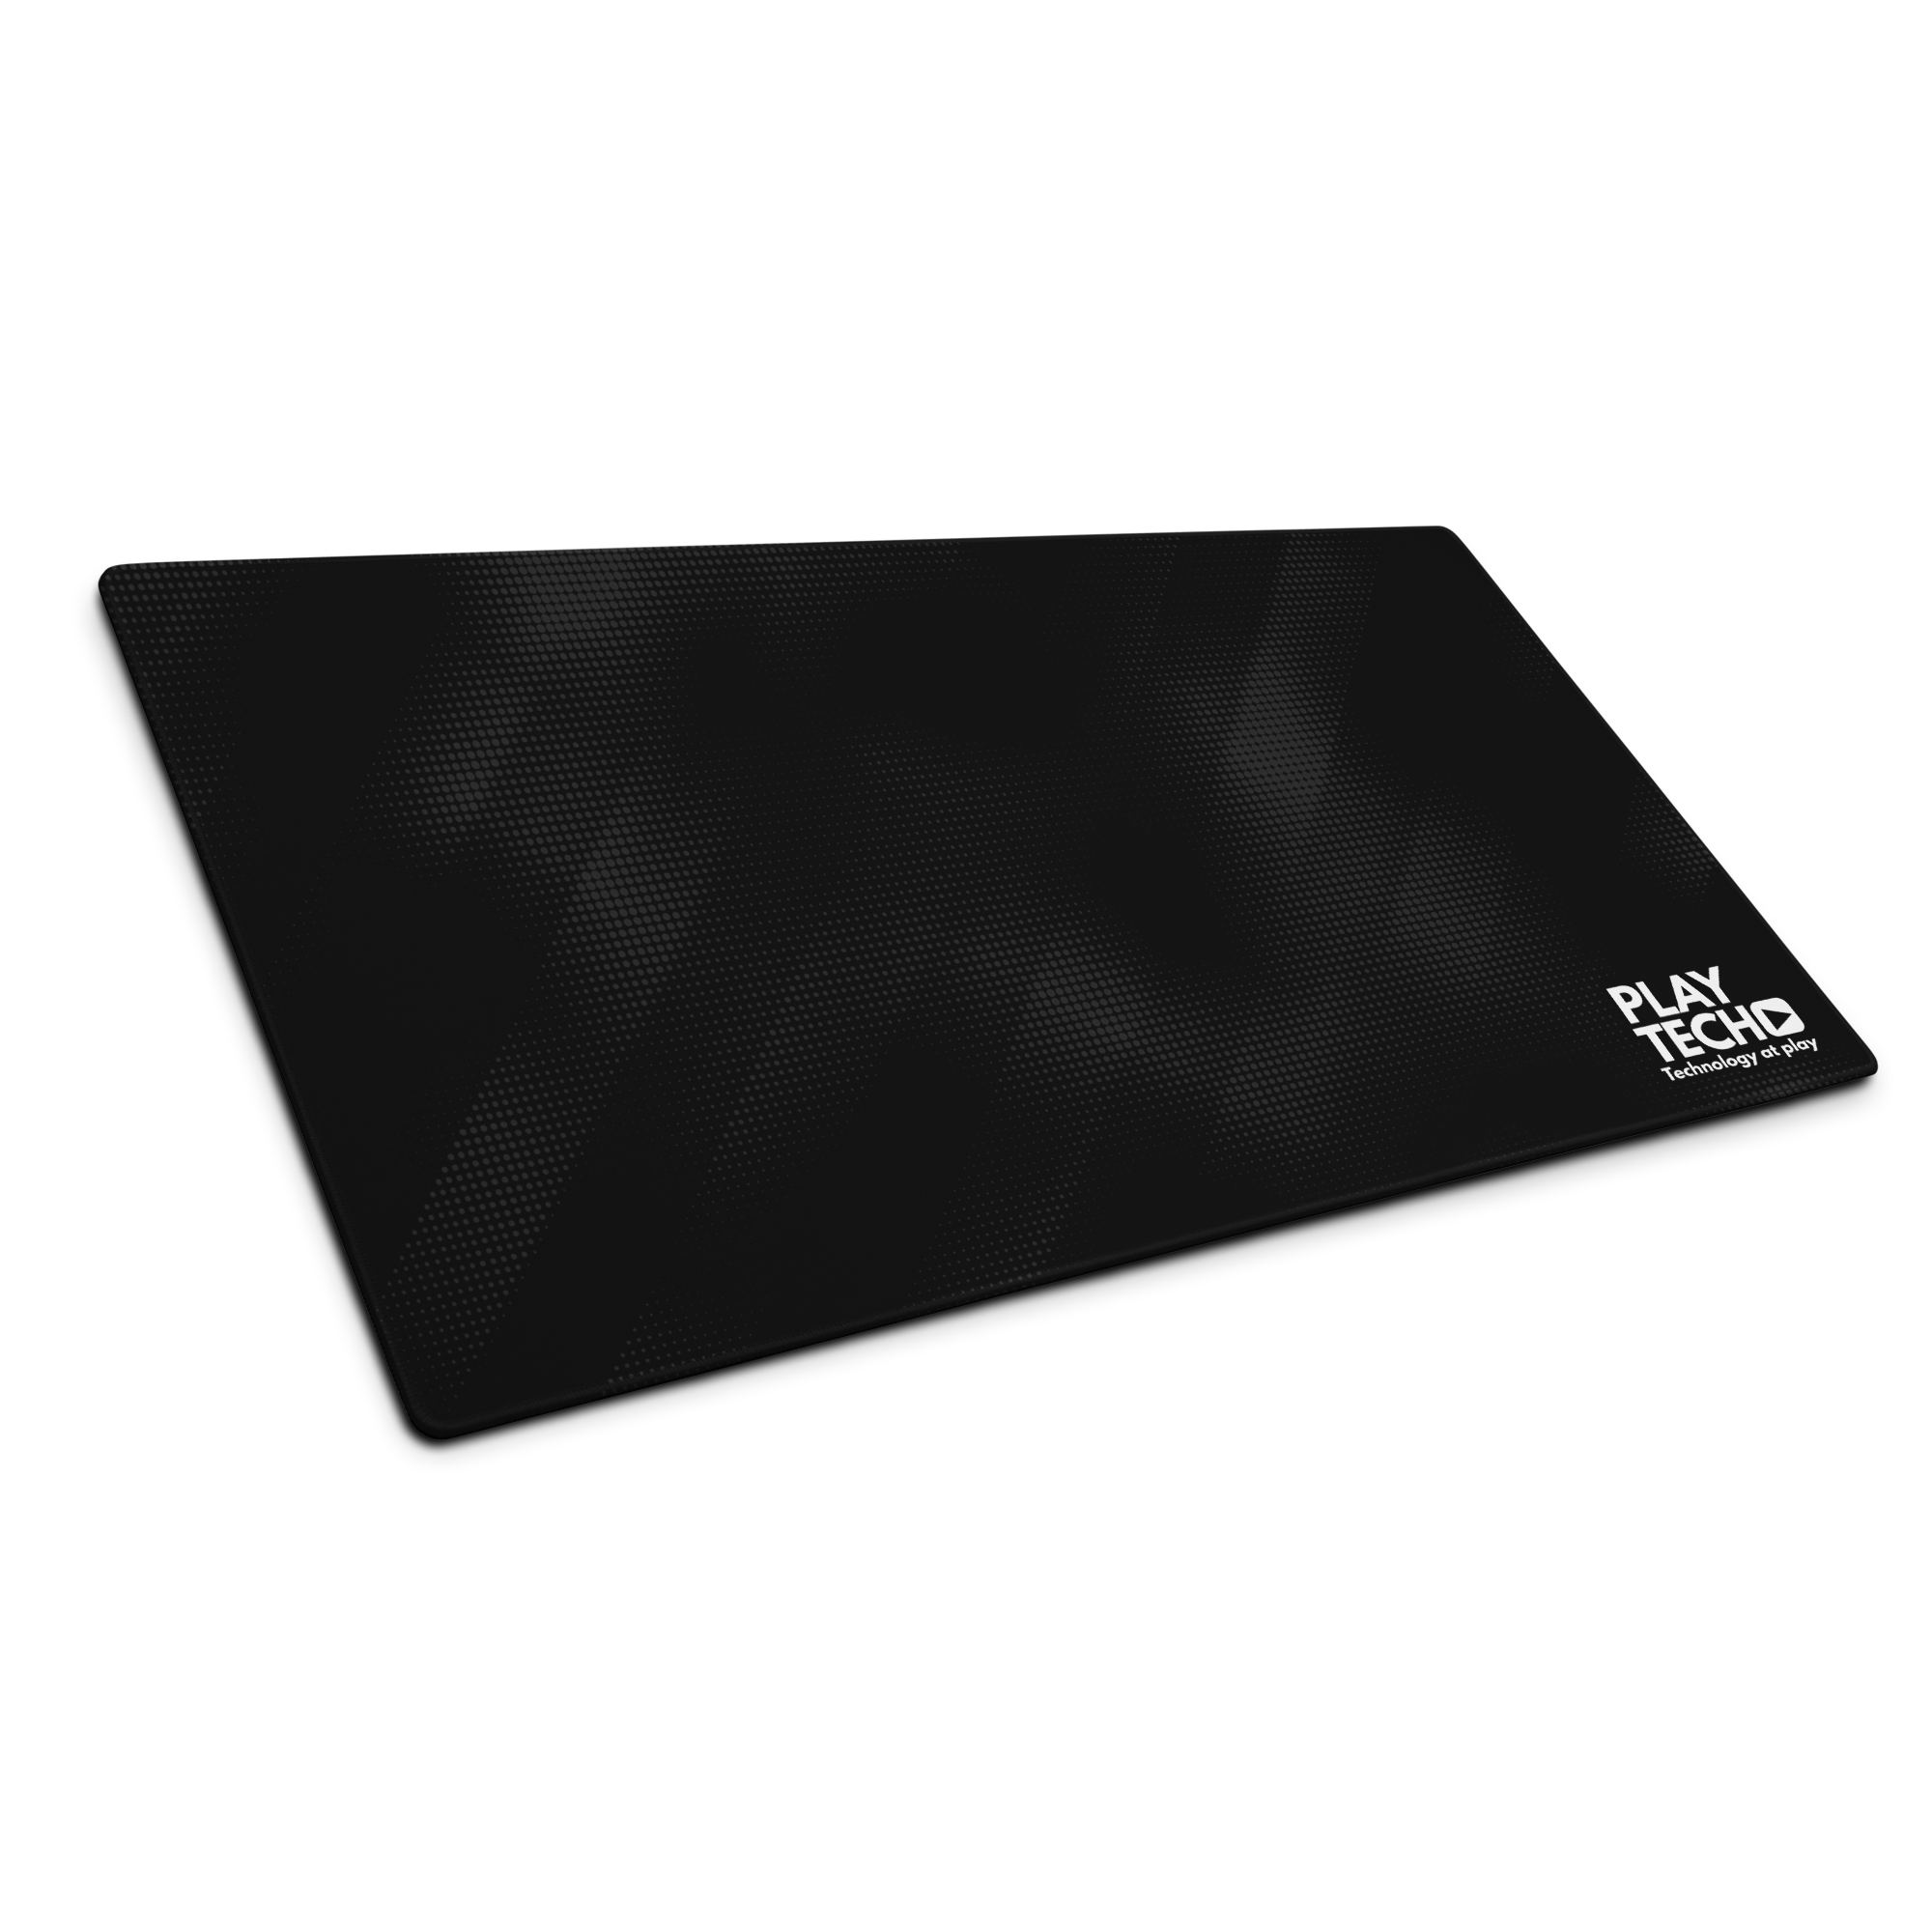 Playtech XL Gaming mouse pad - Playtech